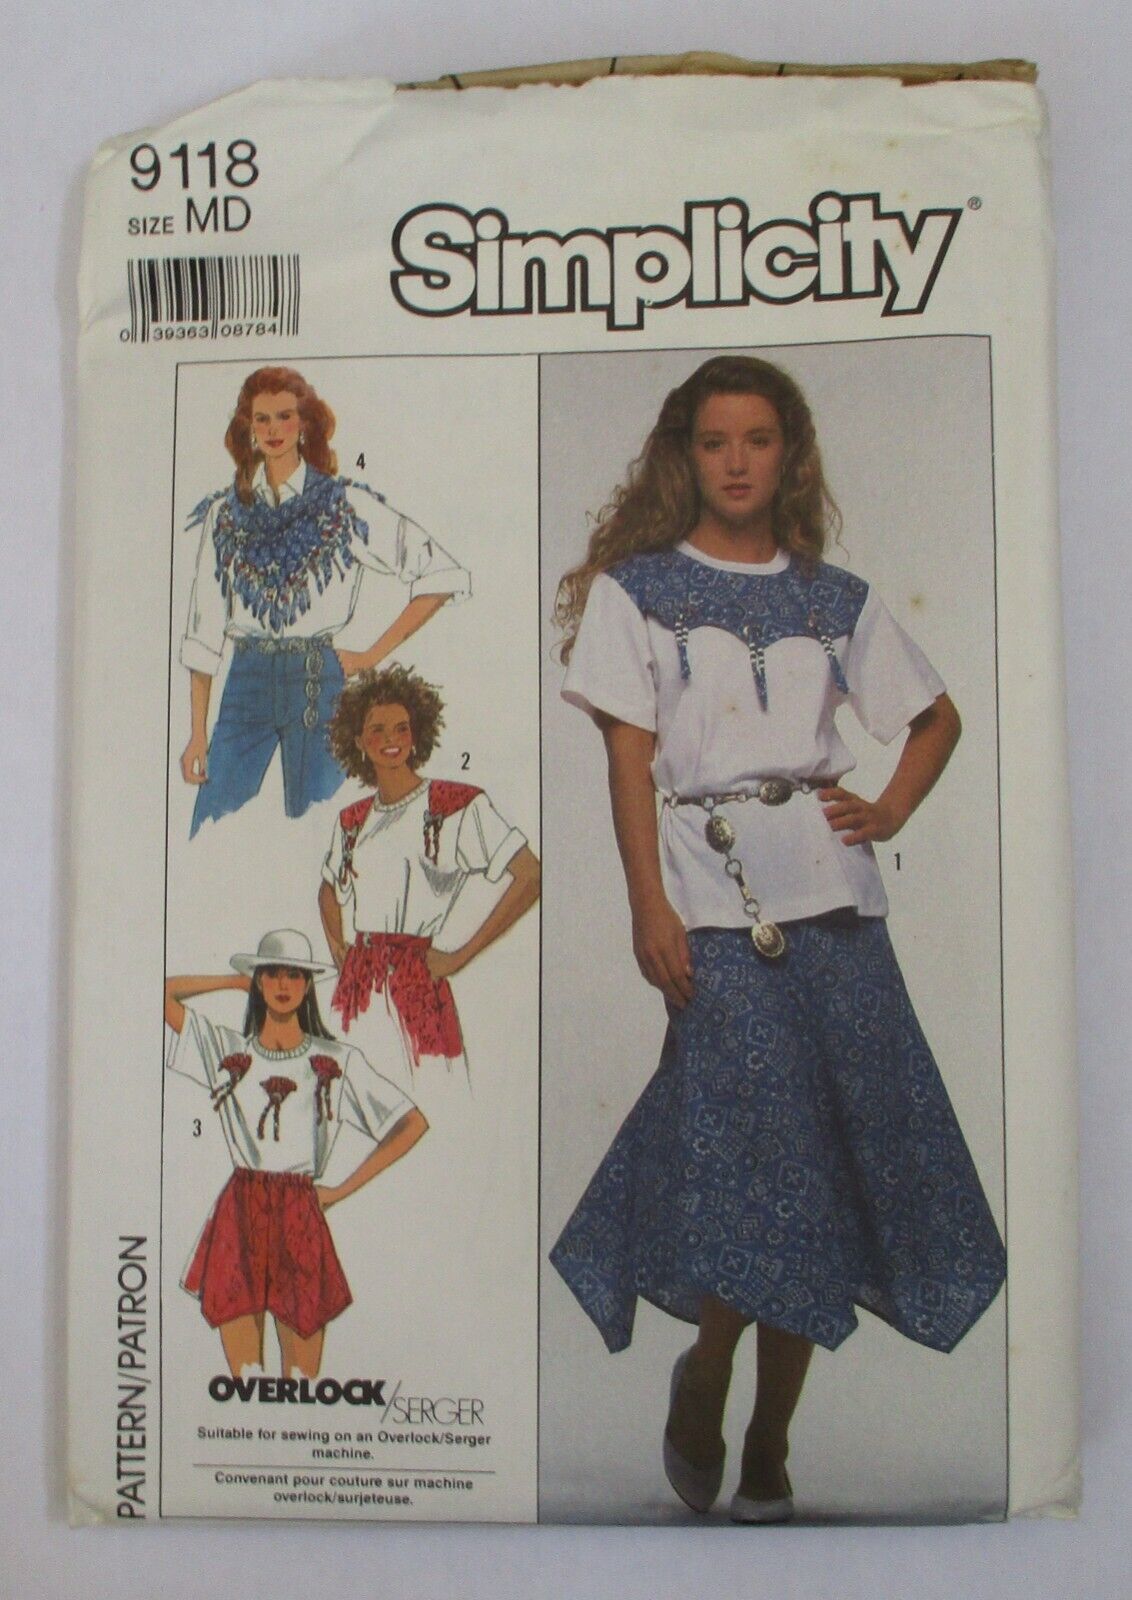 Simplicity 9118 Misses Skirt, Shorts, Top & Scarf Size MD 14-16 Some Pieces Cut - $7.56